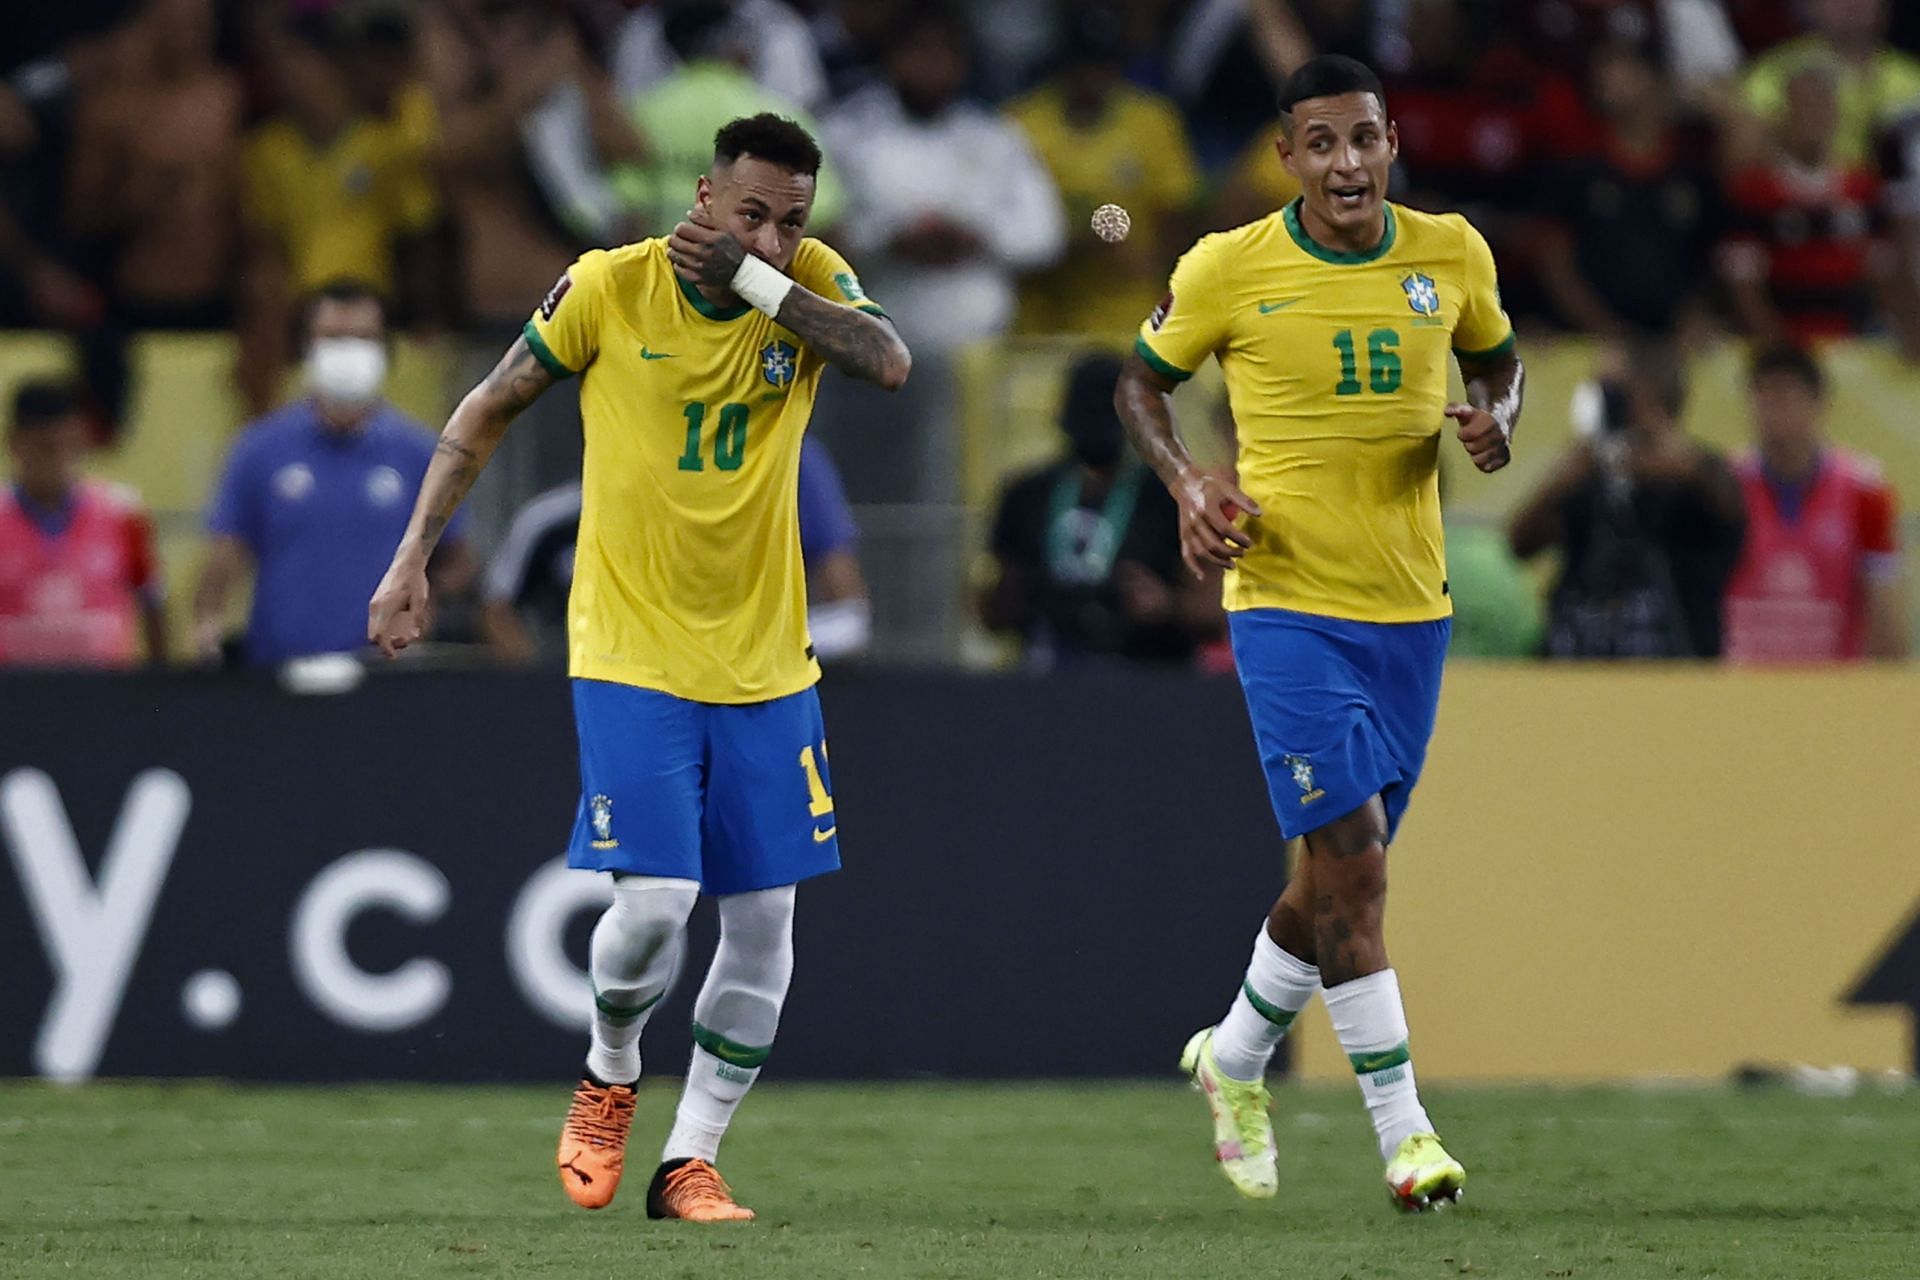 Neymar&#039;s struggles at the club level didn&#039;t seem to affect him as he ran the show for Brazil against Chile.